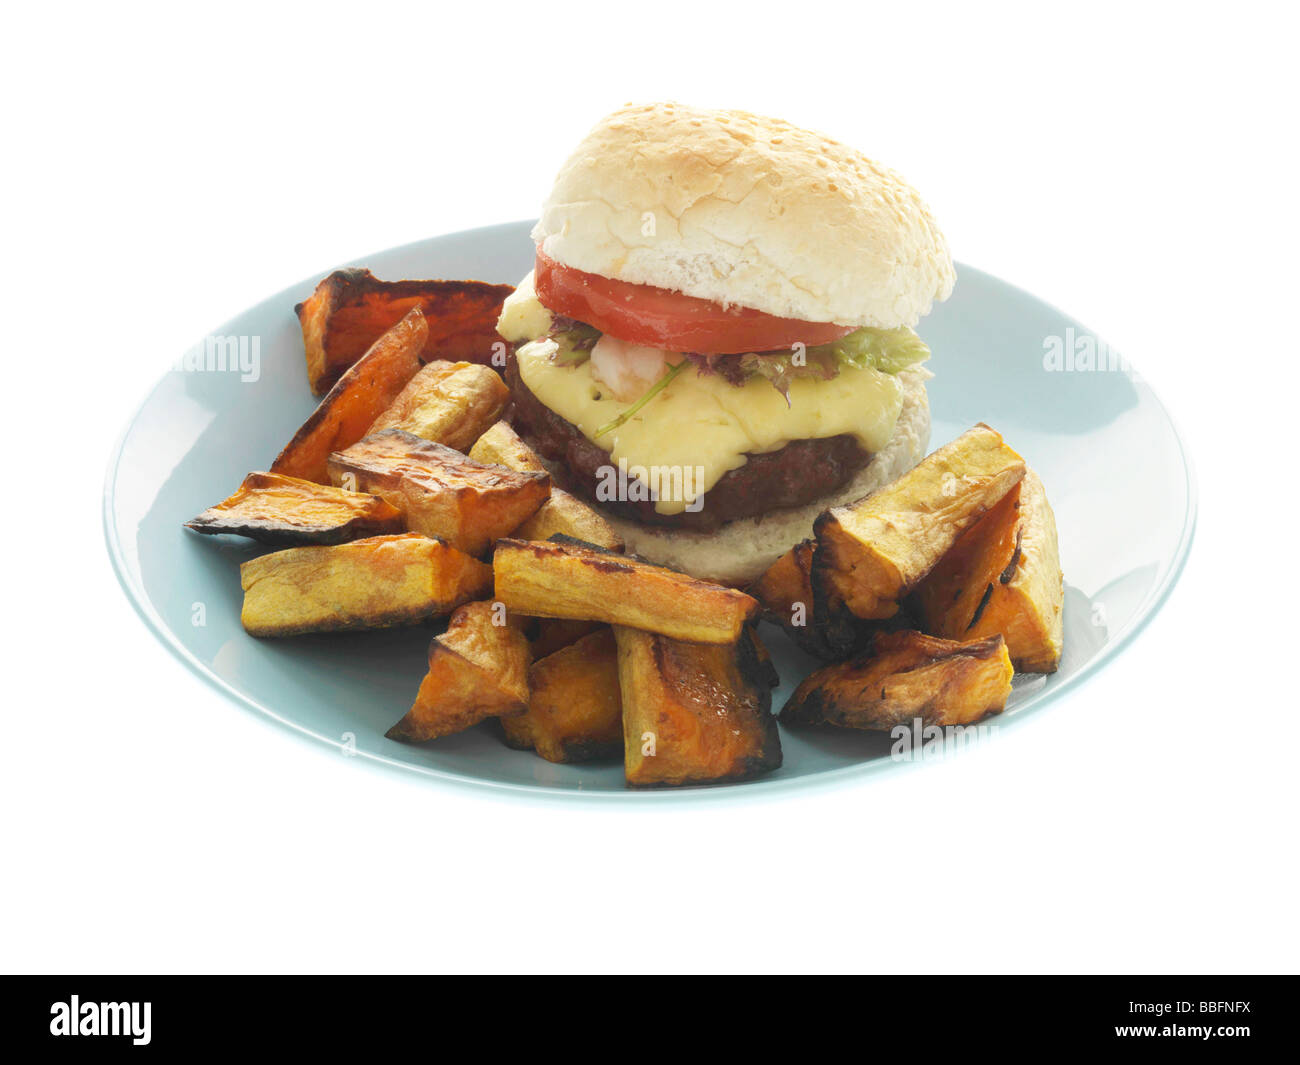 Home Made Cheeseburger with Sweet Potato Wedges Stock Photo